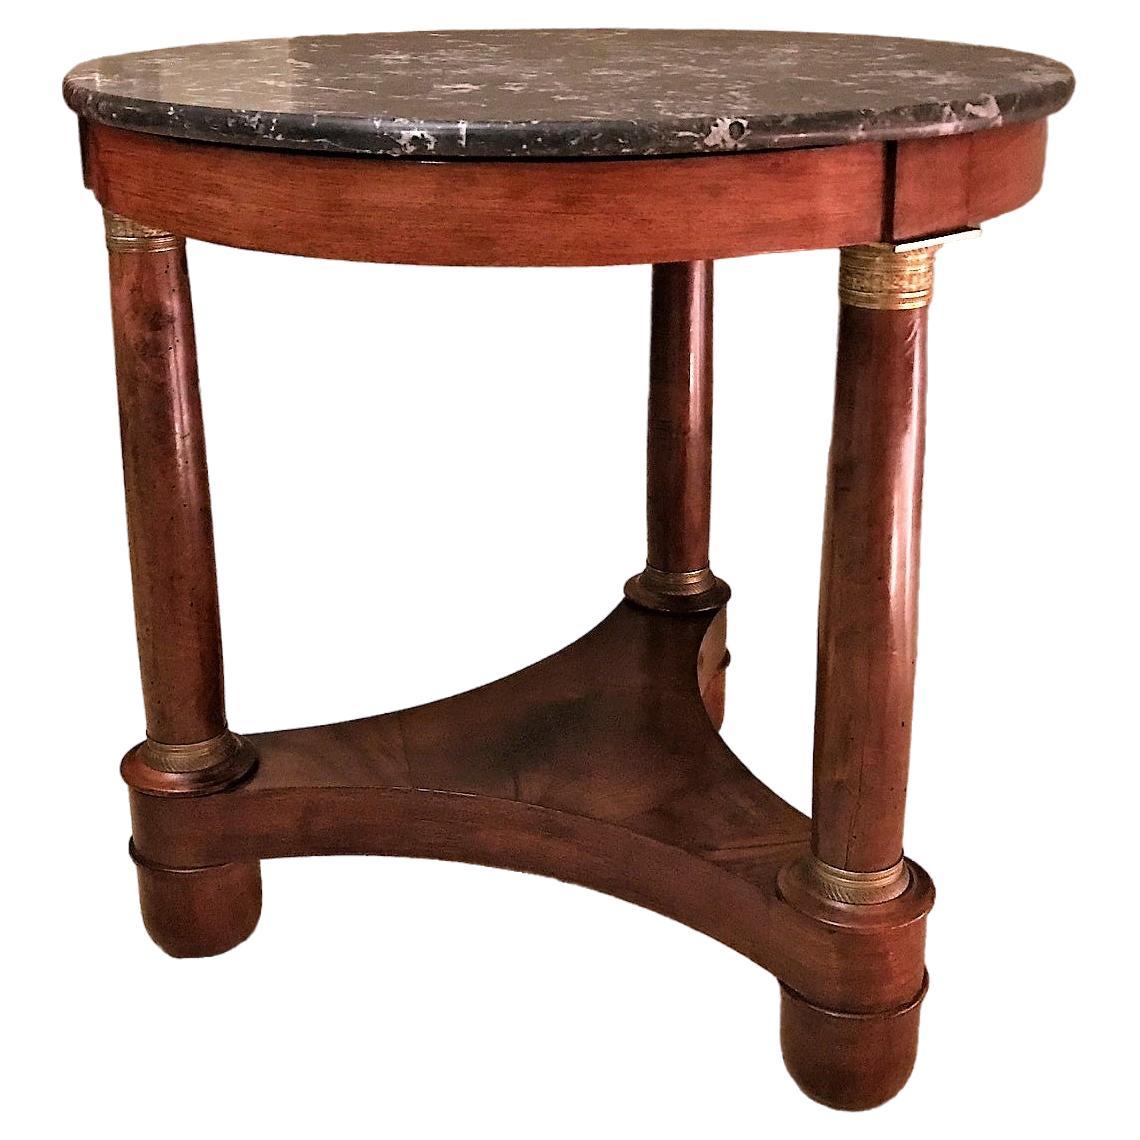 Handsome Small Empire Marble-Top Center Table, France, Circa 1810 For Sale